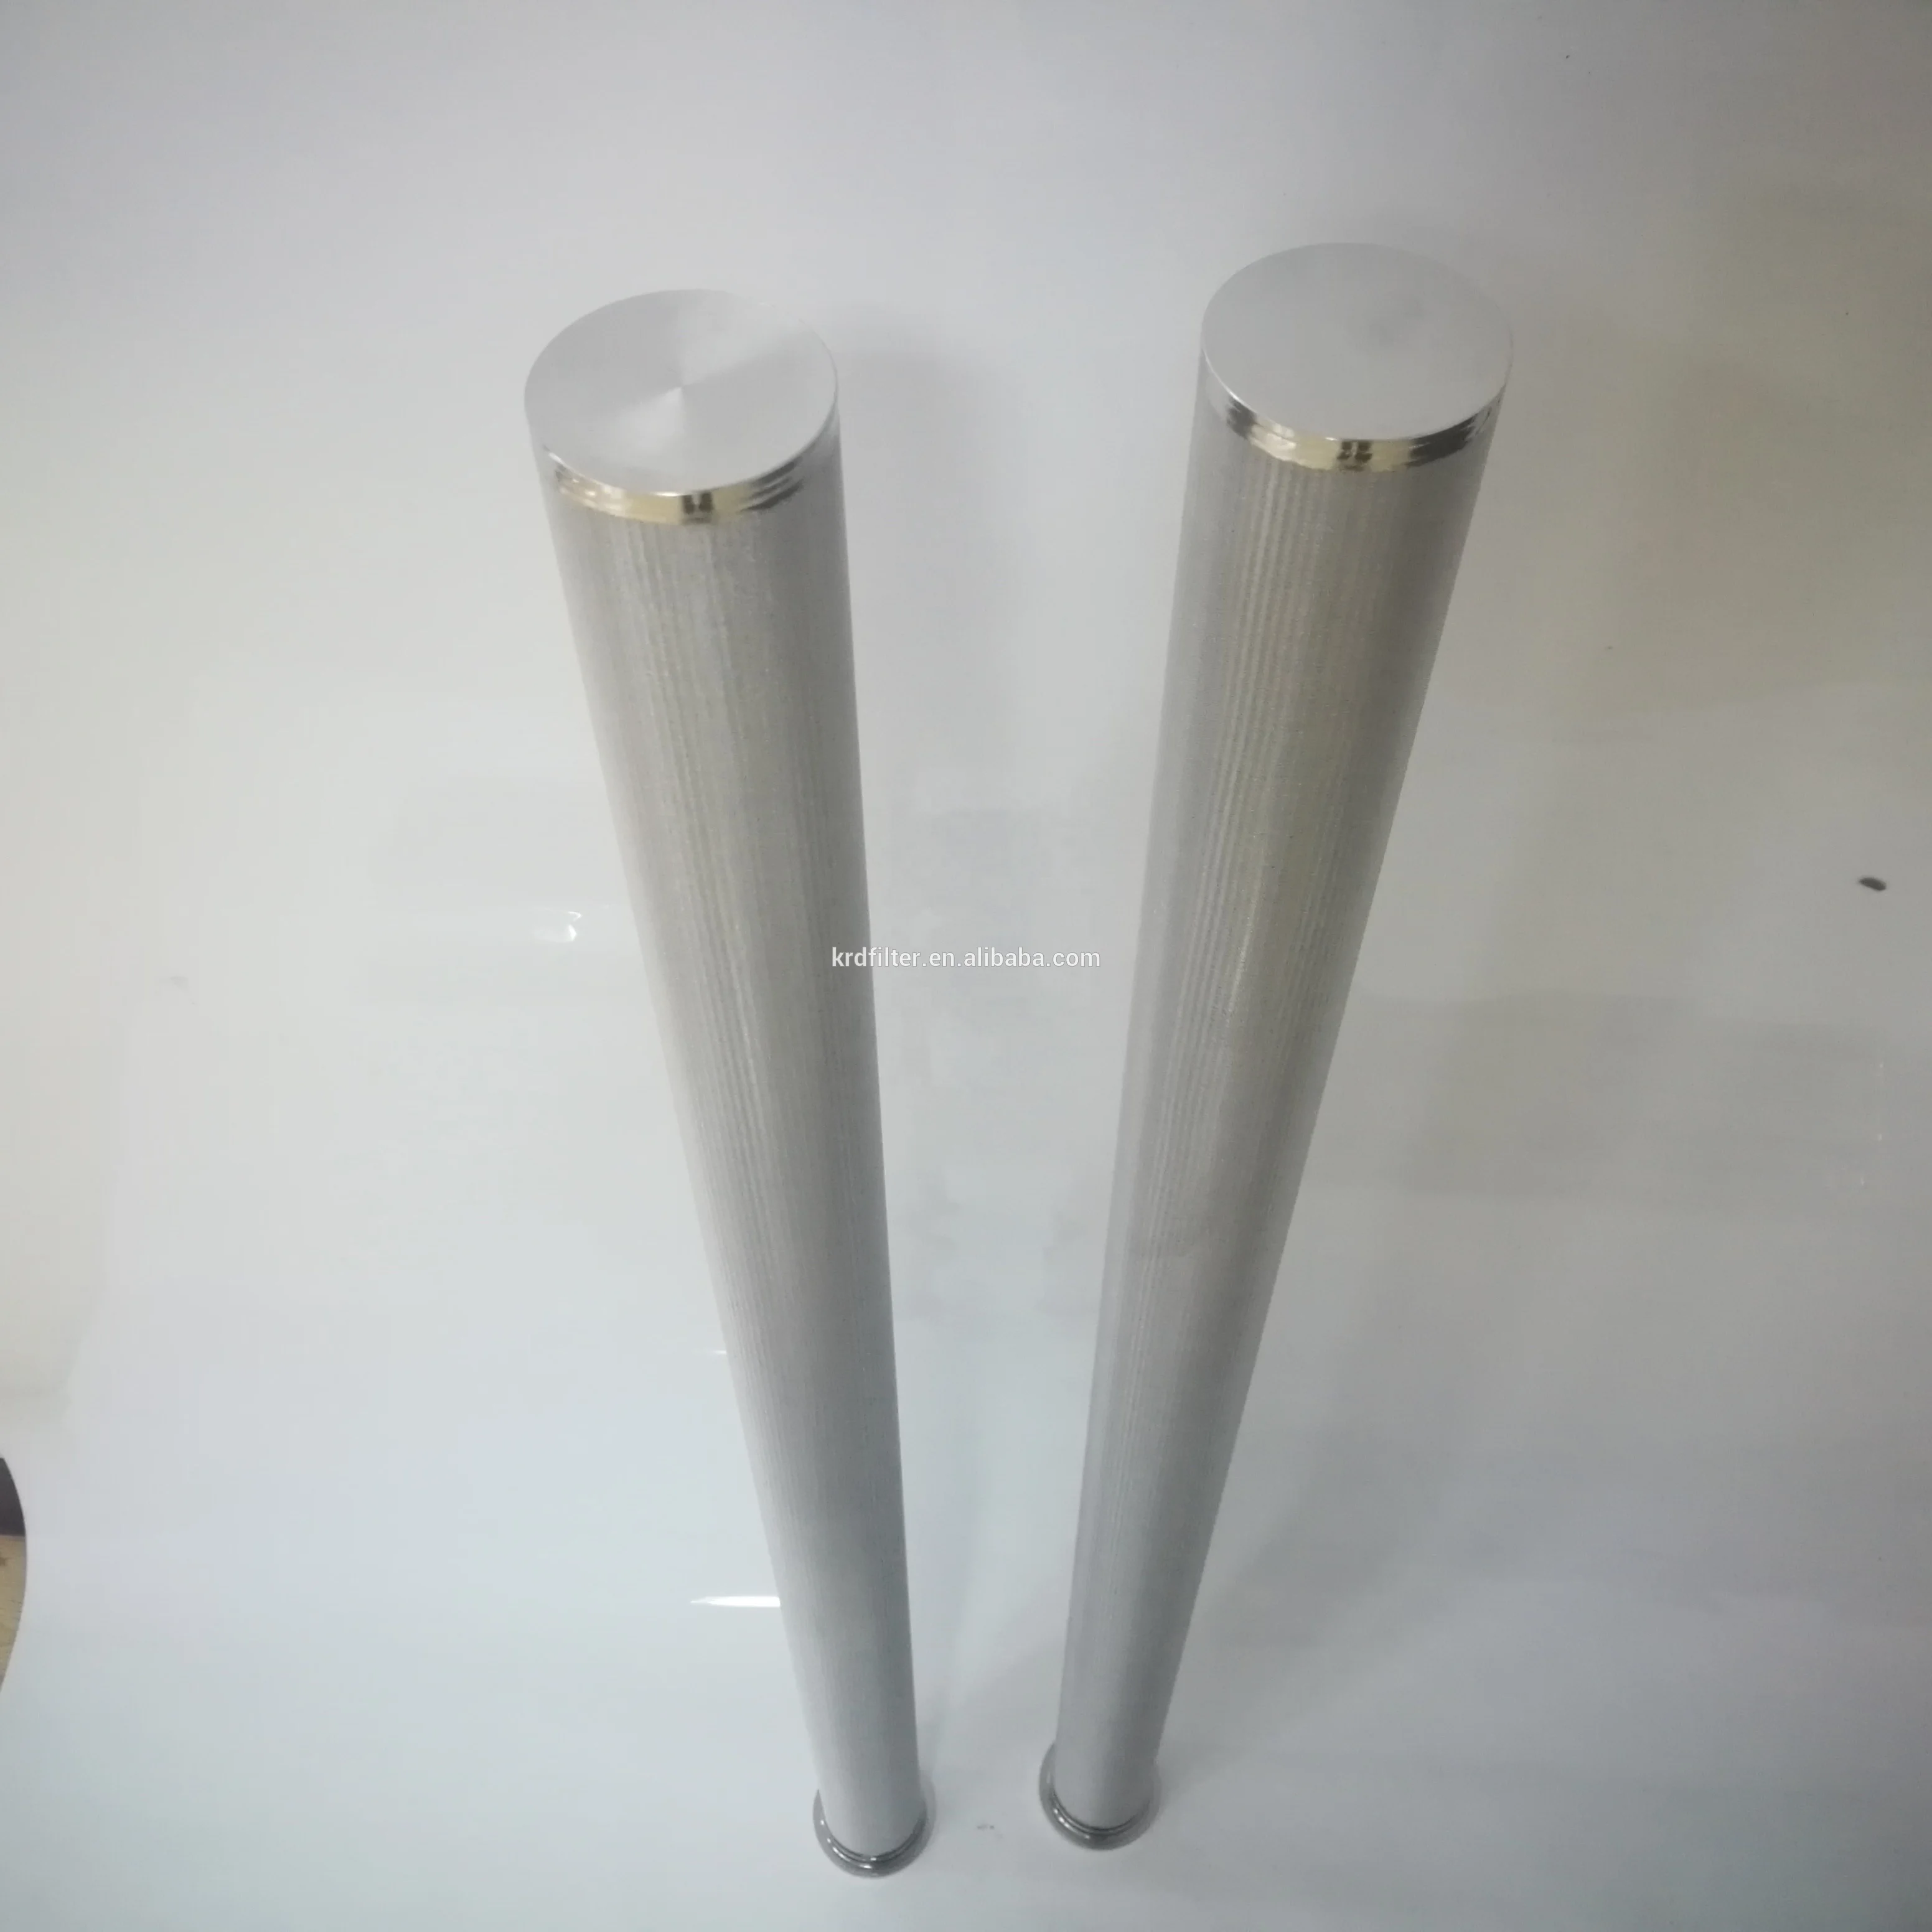 high quality sintered filter element are comprised of five layers mental of wire mesh